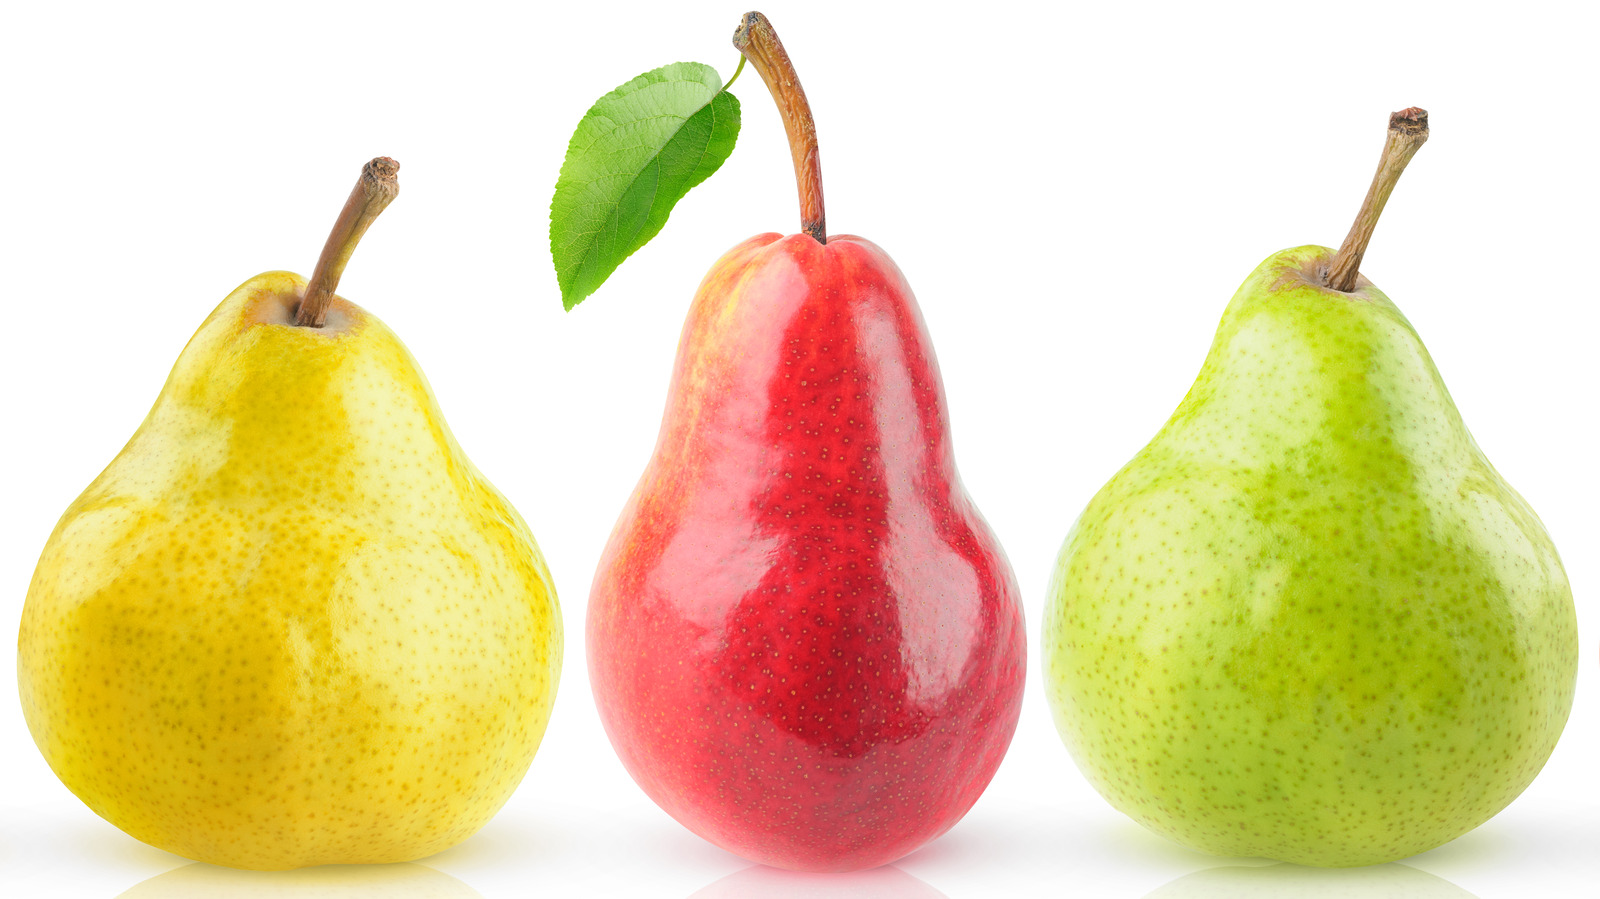 How To: Identify Apple and Pear Varieties